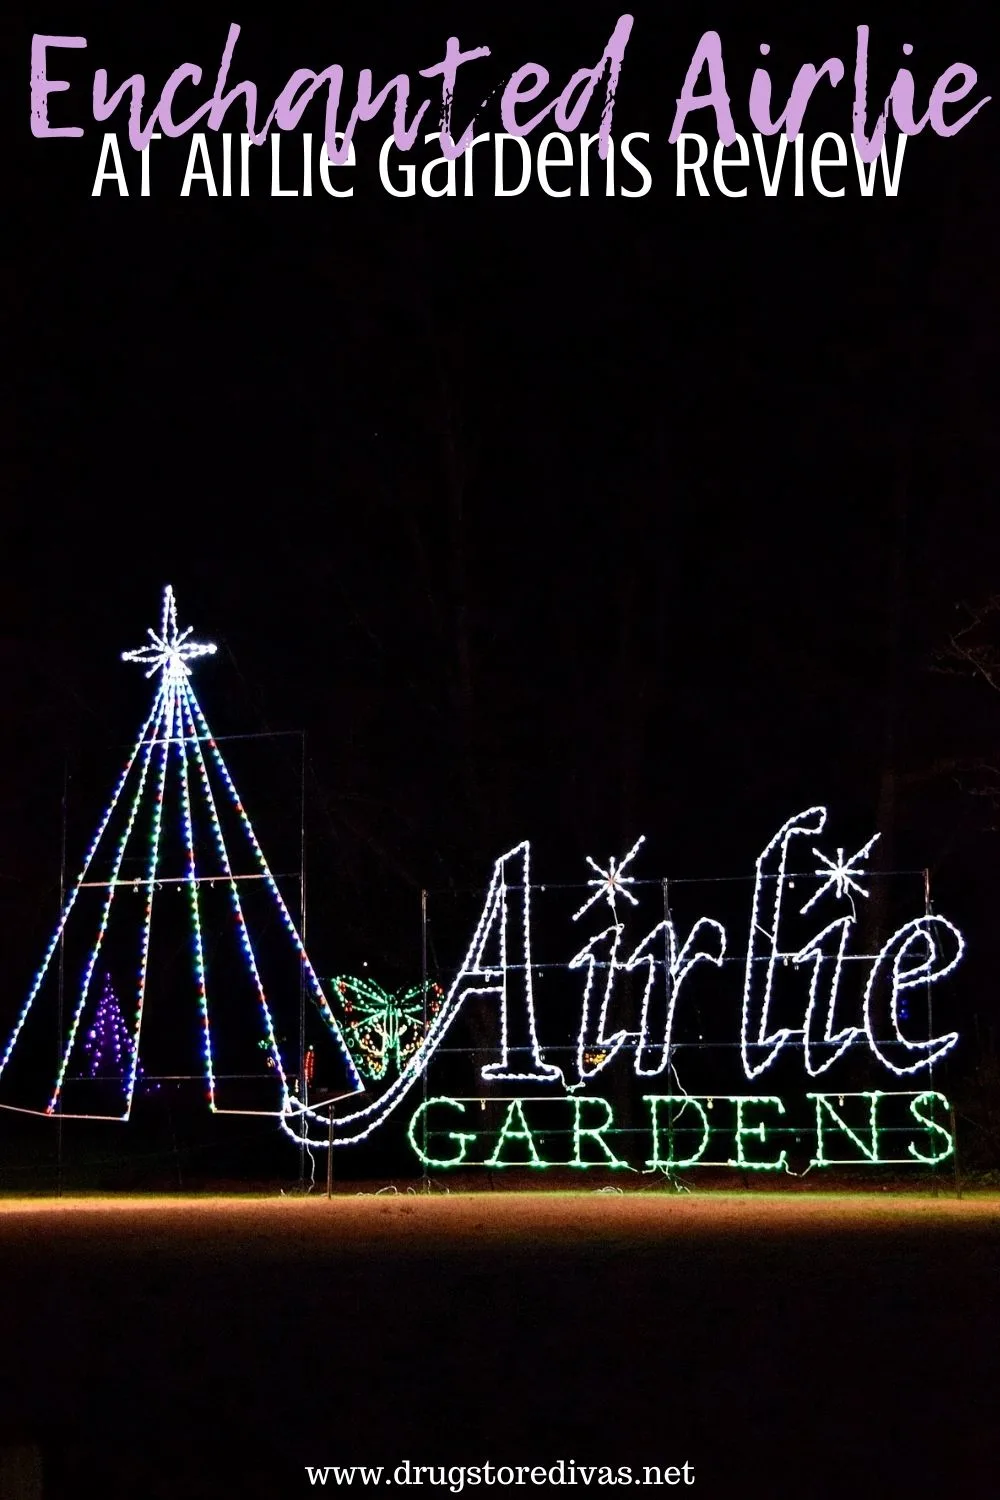 An Airlie Gardens sign in lights with the words 